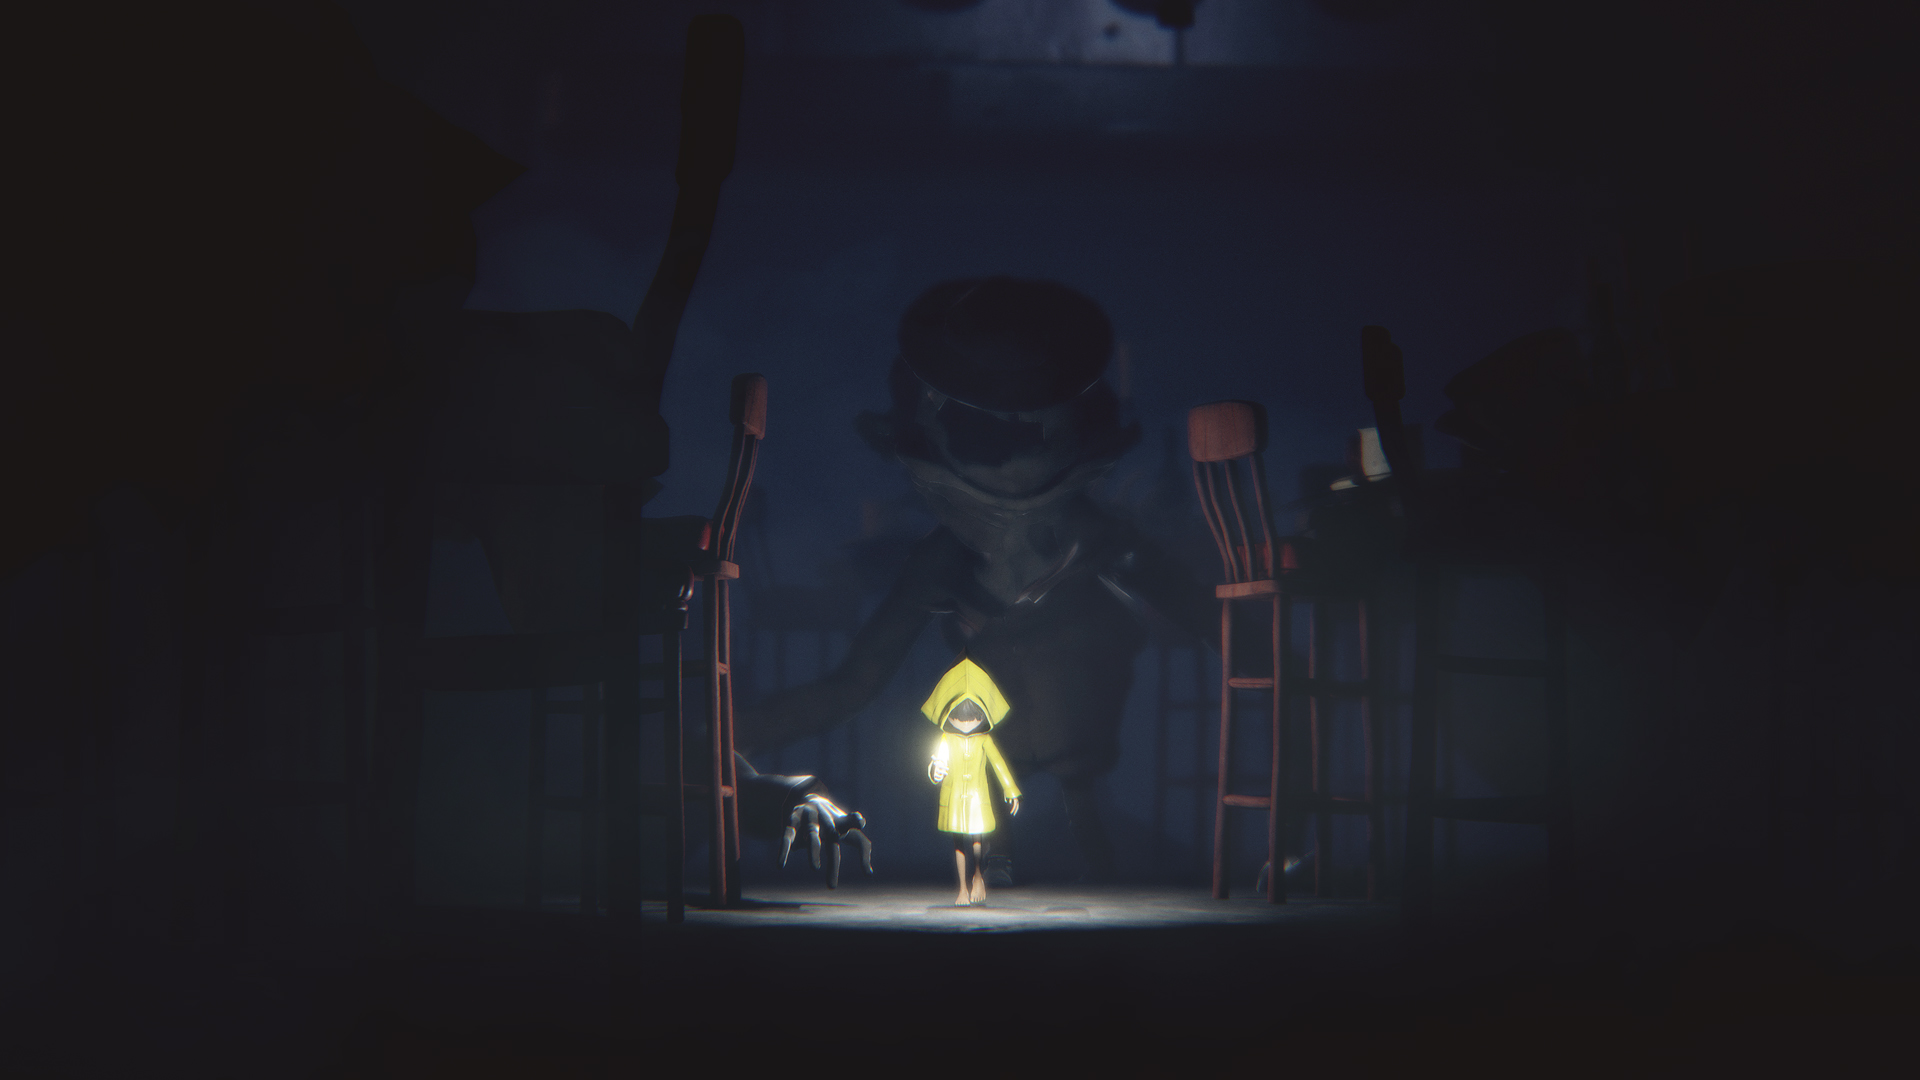 Does Little Nightmares 2 Feature Any Form of Co-Op?? : r/LittleNightmares